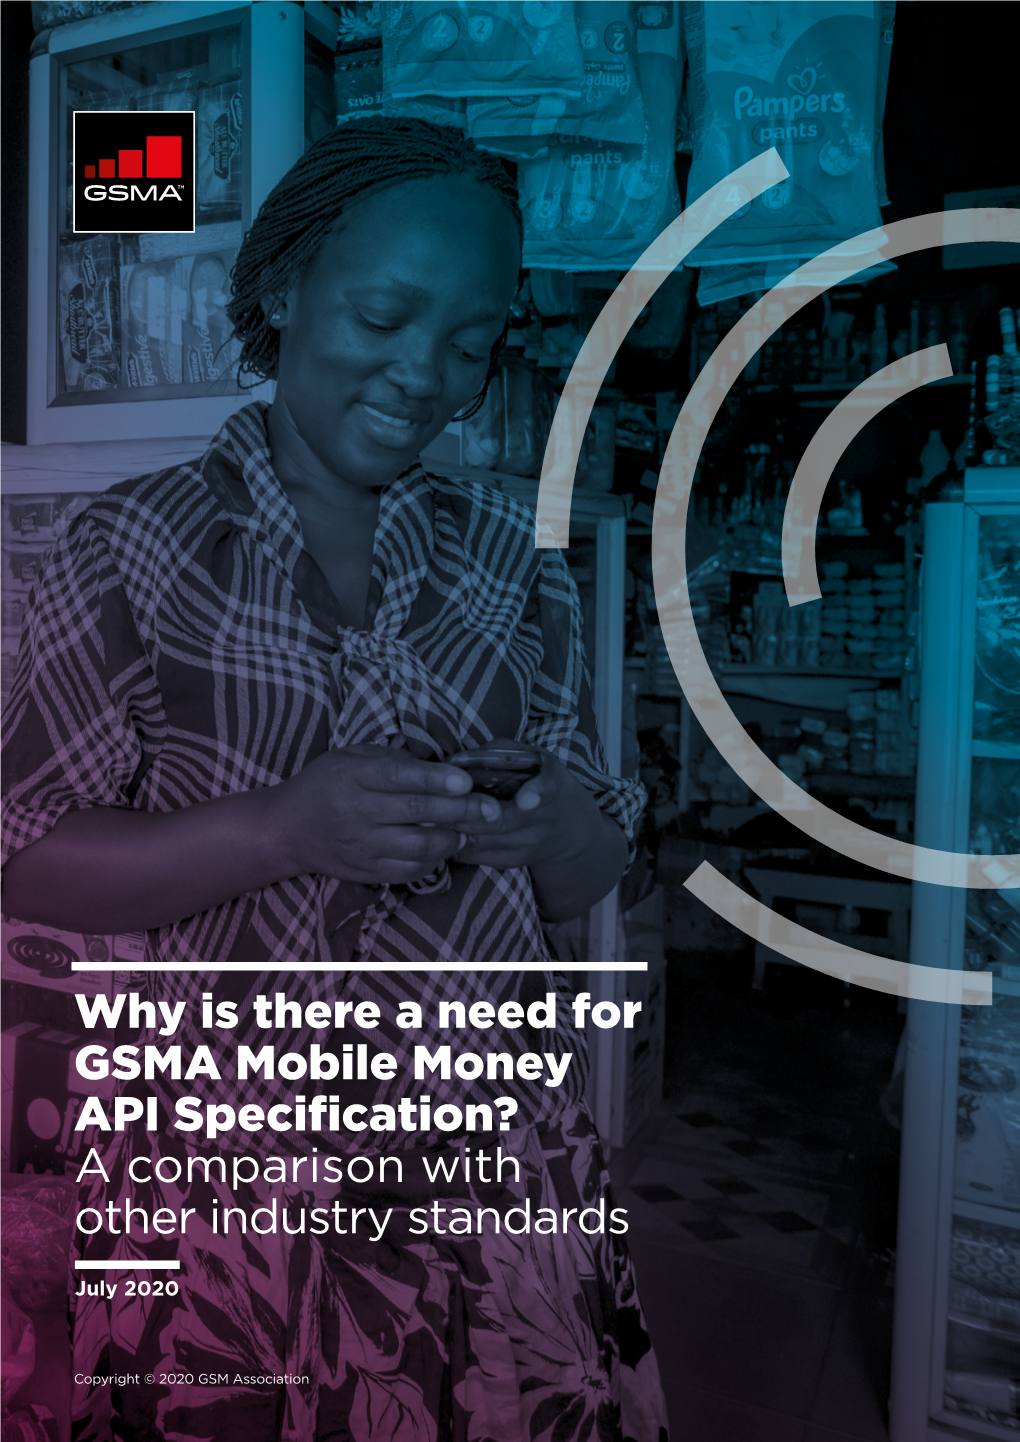 Why Is There a Need for GSMA Mobile Money API Specification? a Comparison with Other Industry Standards